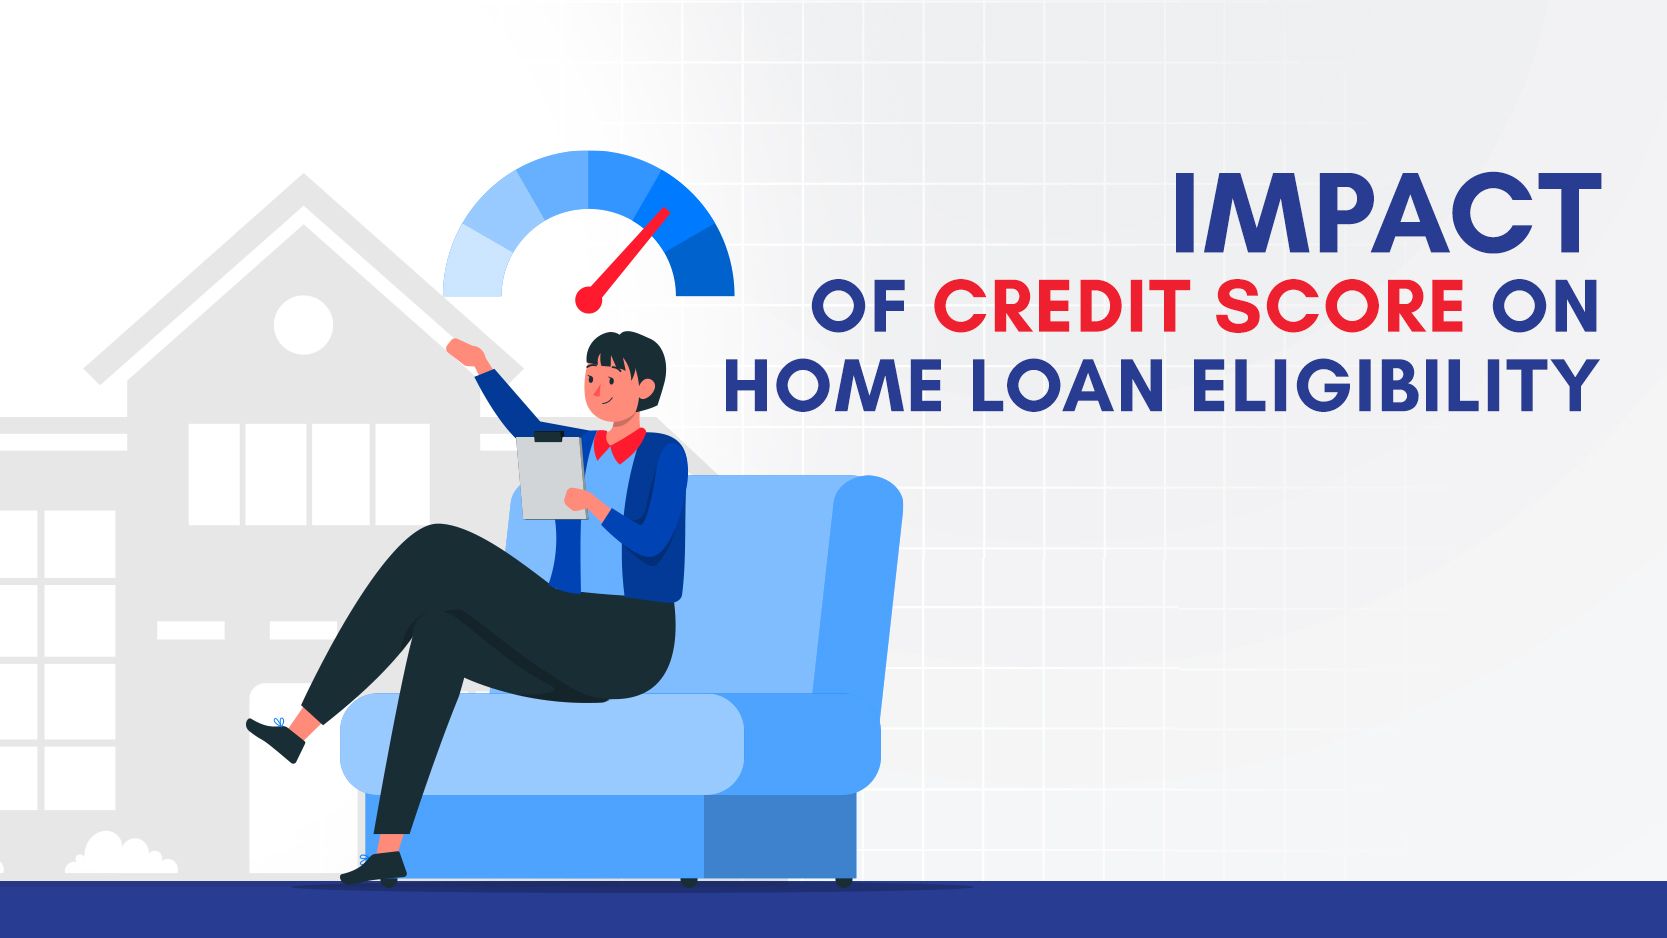 Impact of Credit Score on Home Loan Eligibility